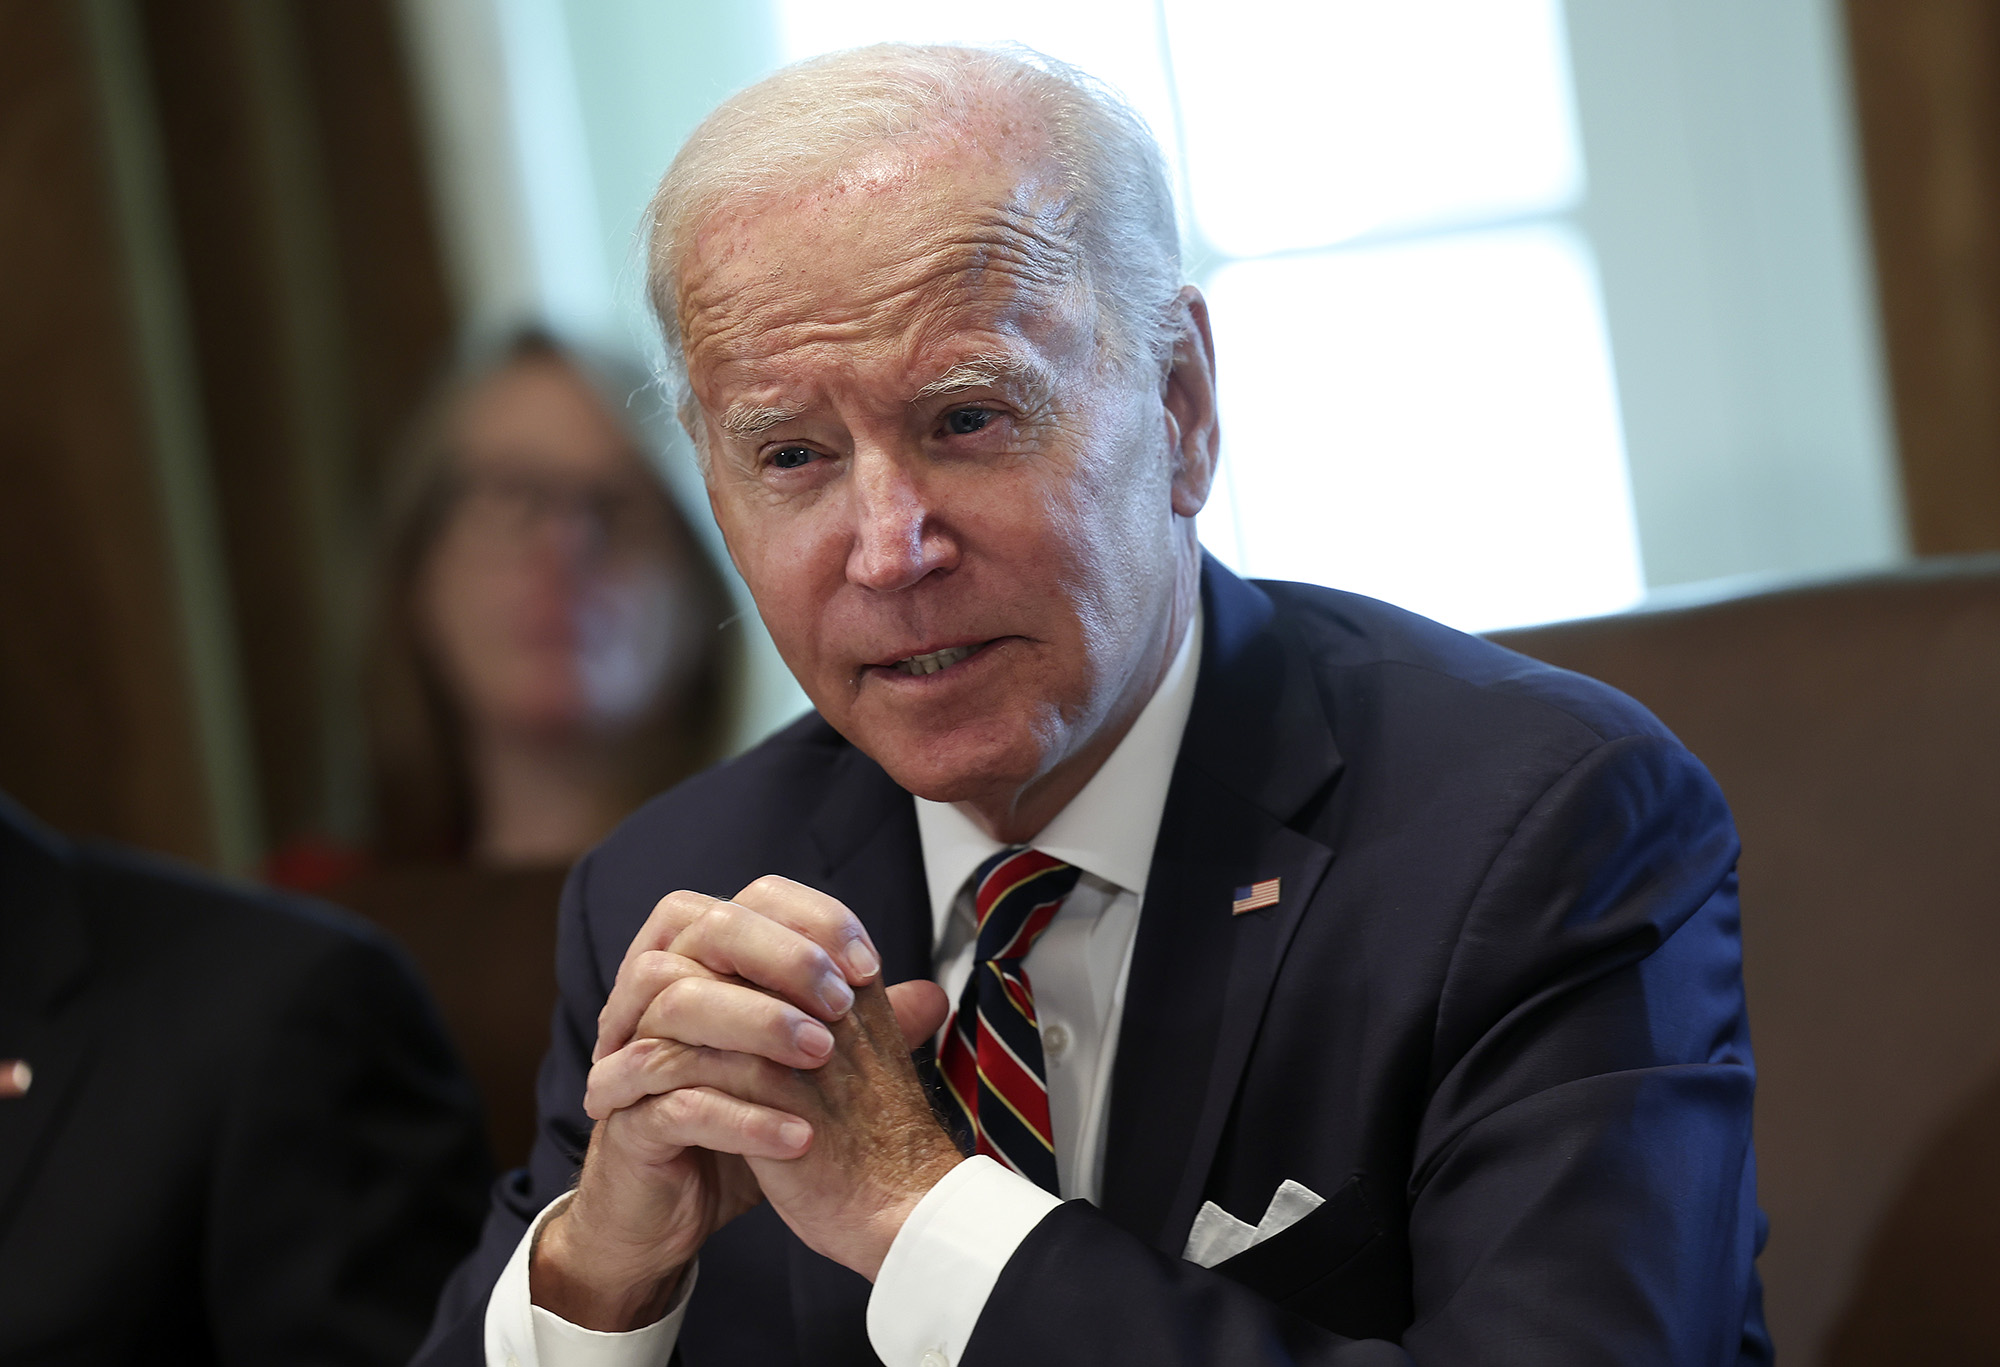 US President Joe Biden delivers remarks during a Cabinet Meeting at the White House on September 6.